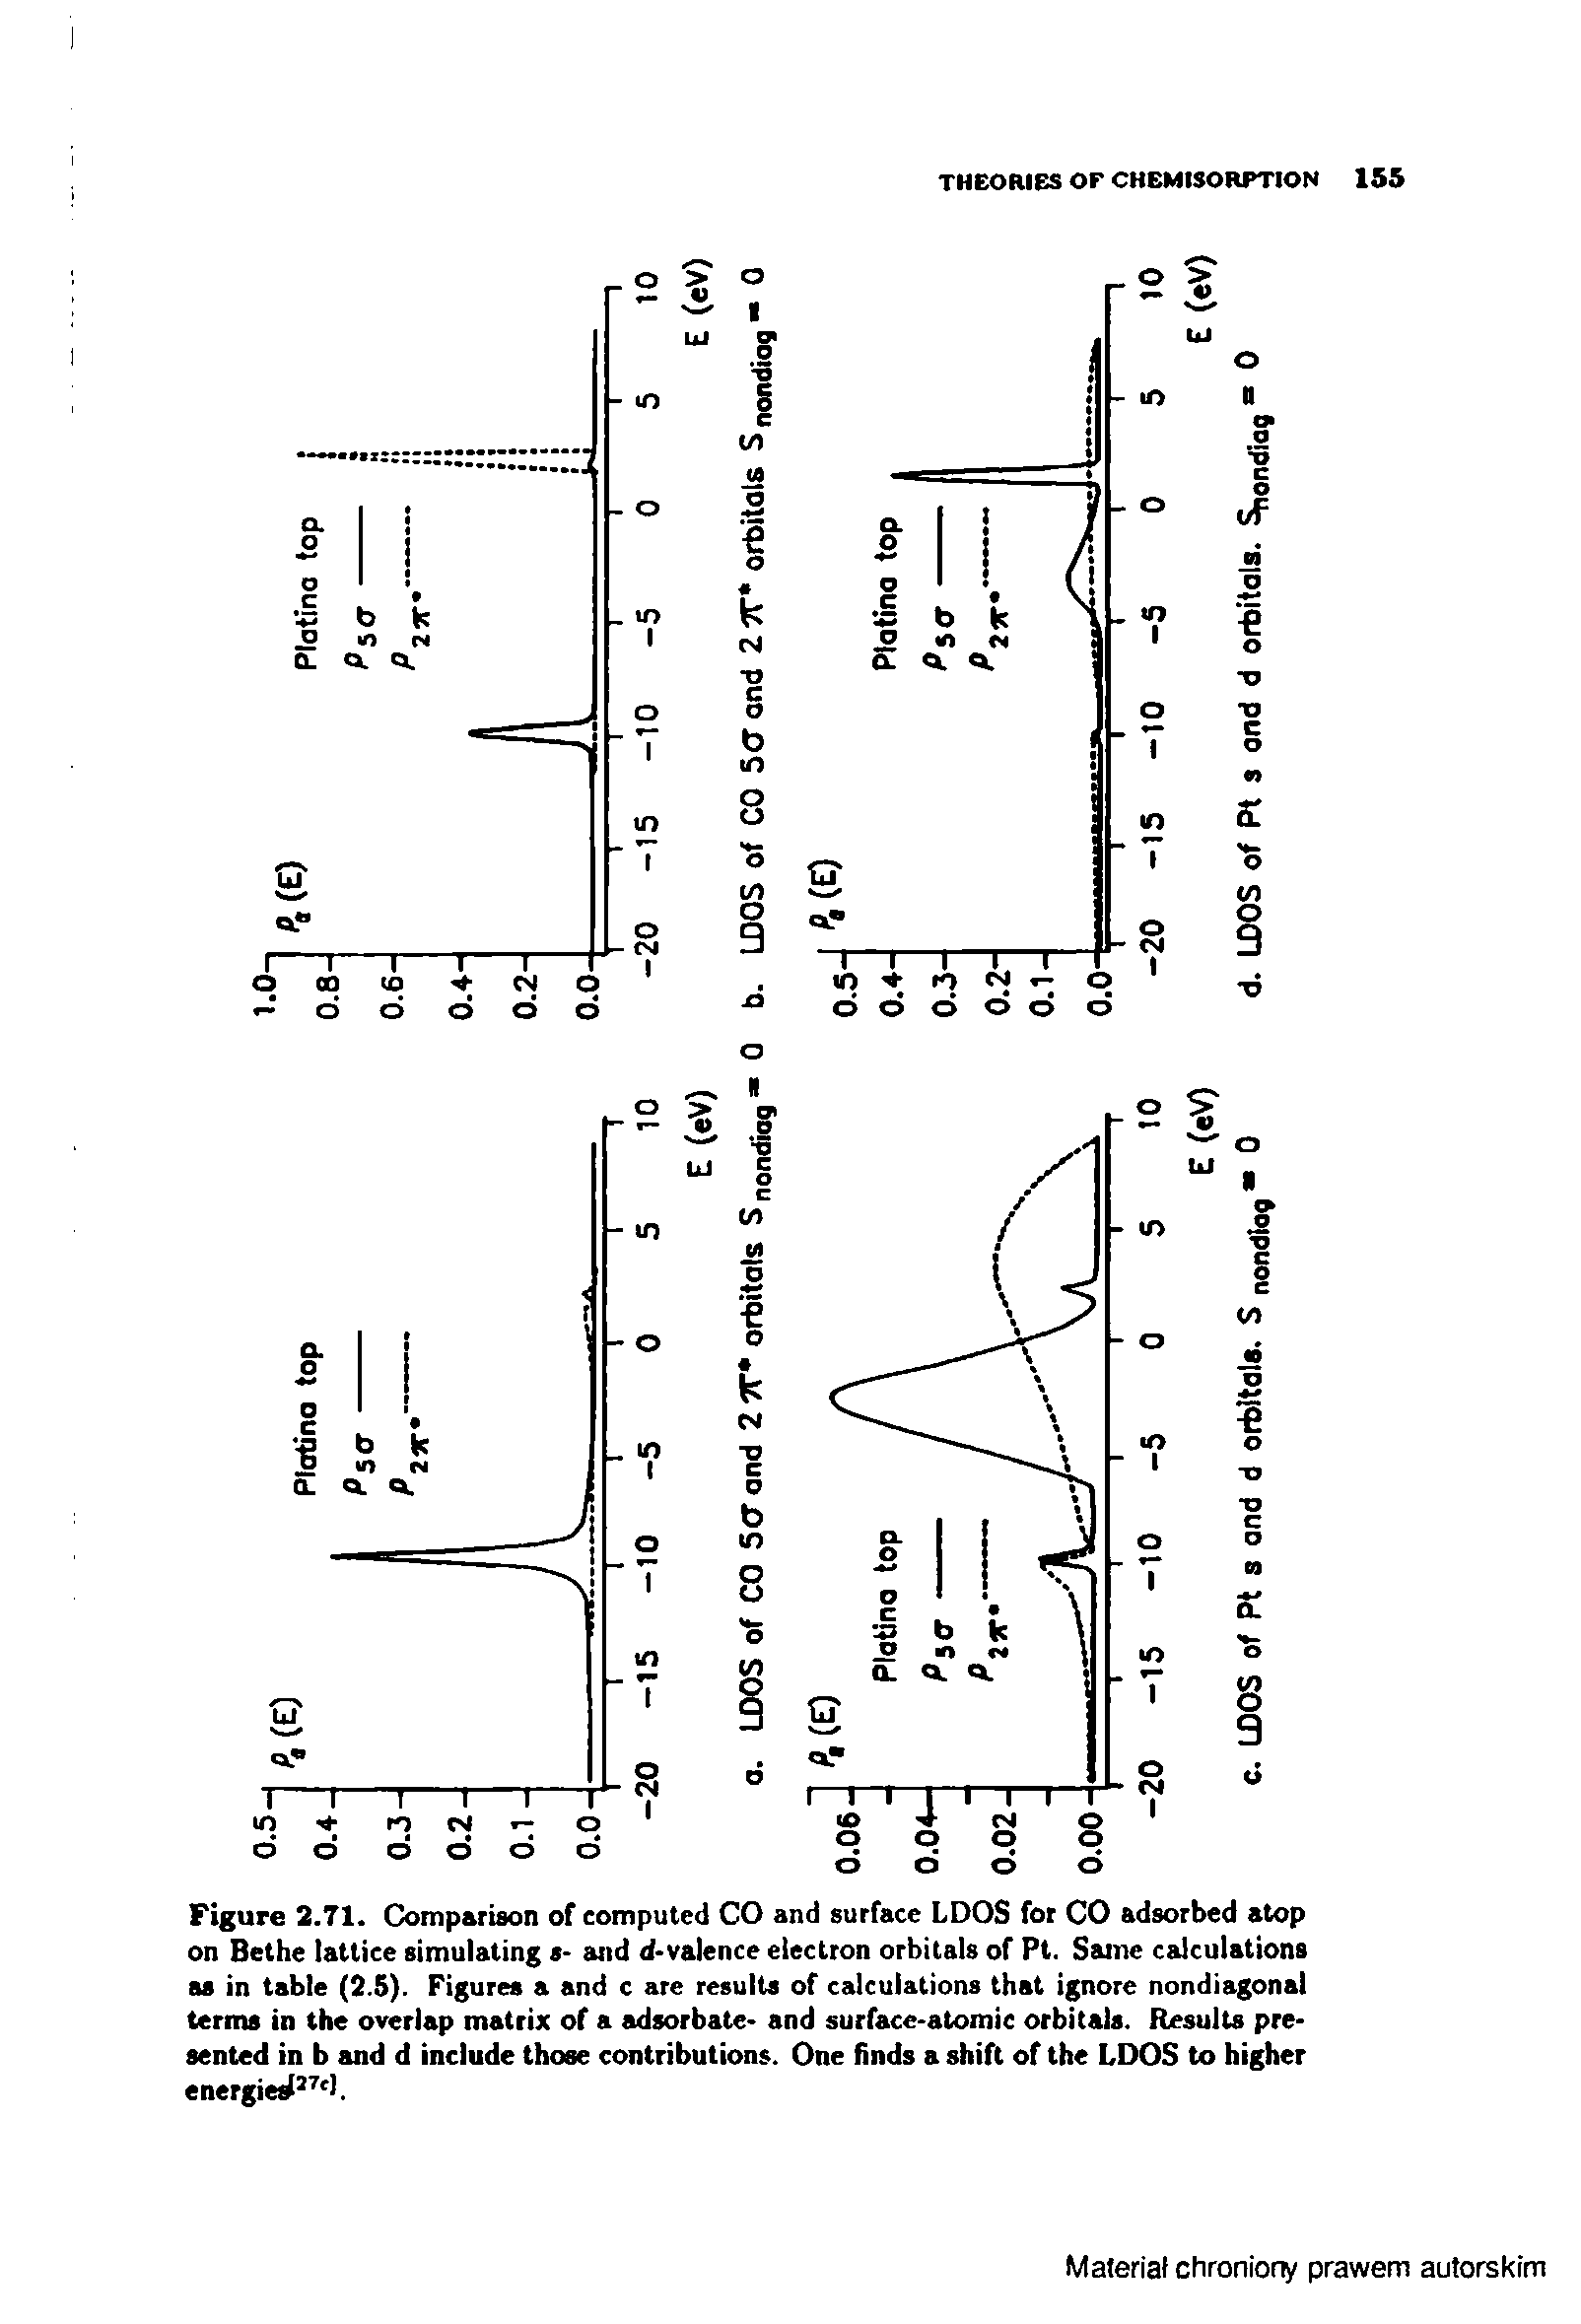 Figure 2.71. Comparison of computed CO and surface LDOS for CO adsorbed atop on Bethe lattice simulating s- and d>valence electron orbitals of Pt. Same calculations as in table (2.5). Figures a and c are results of calculations that ignore nondiagonal terms in the overlap matrix of a adsorbate- and surface-atomic orbitals. Results presented in b and d include those contributions. One finds a shift of the LDOS to higher...